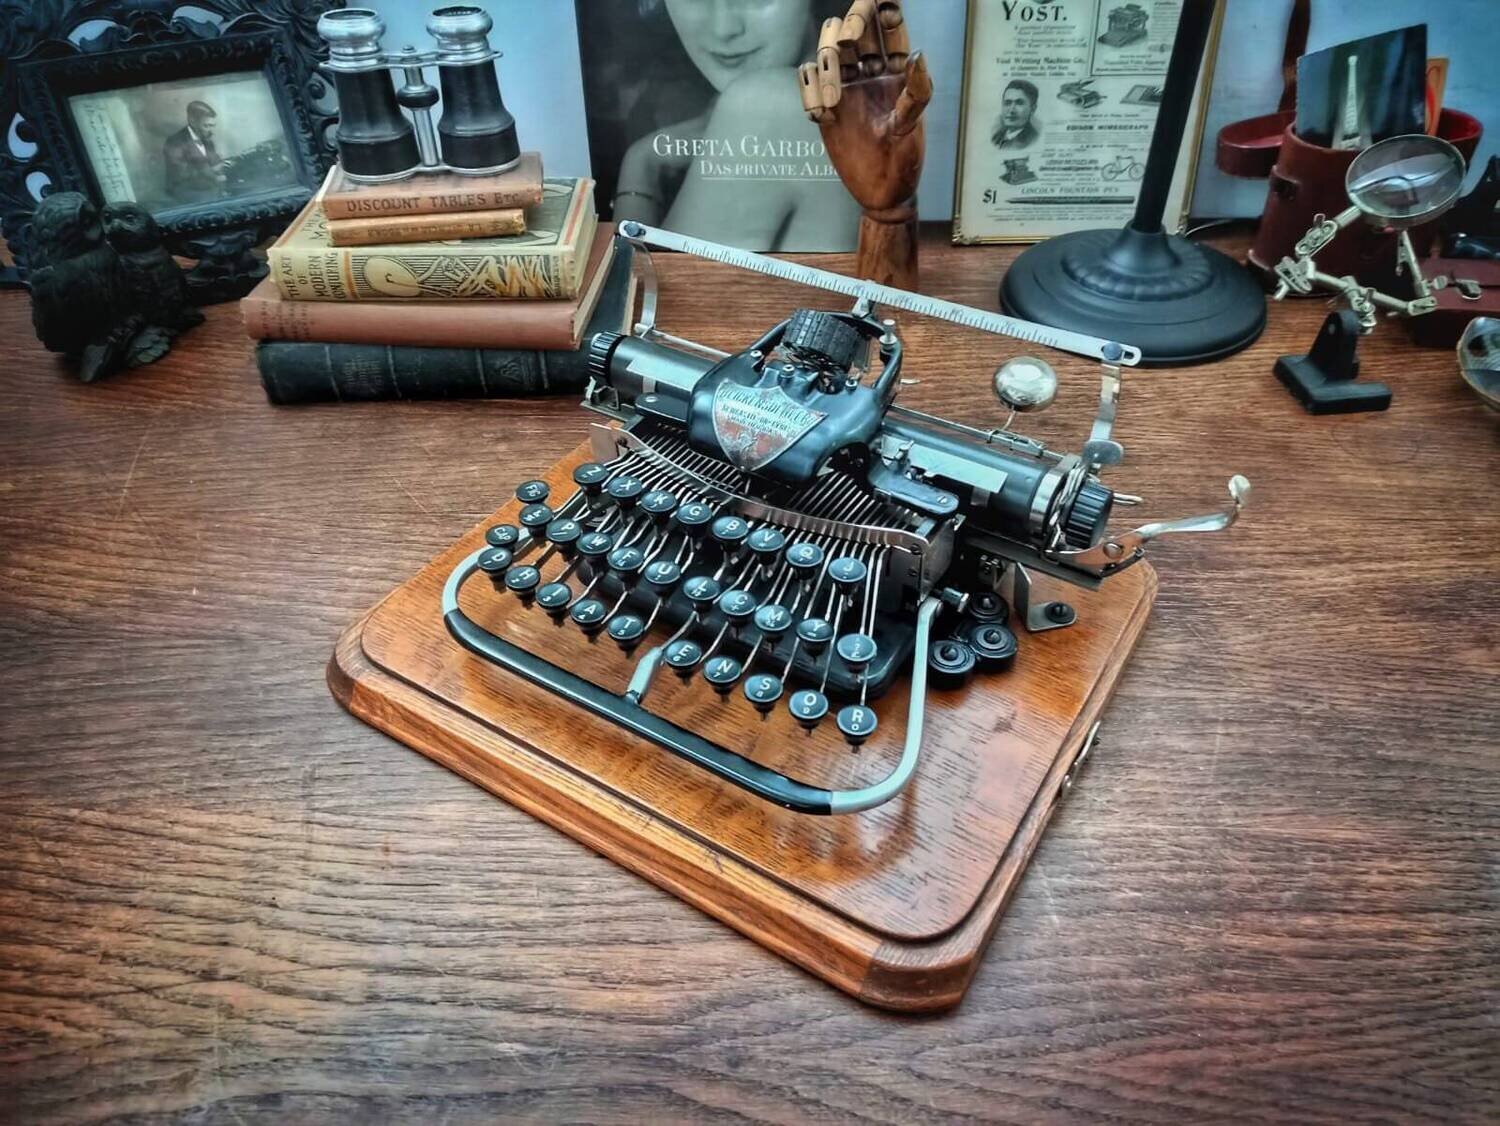 Blickensderfer Nº7, 1900 Antique Rare Typewriter, Vintage, Manual Portable, Professionally Serviced by Typewriter.Company